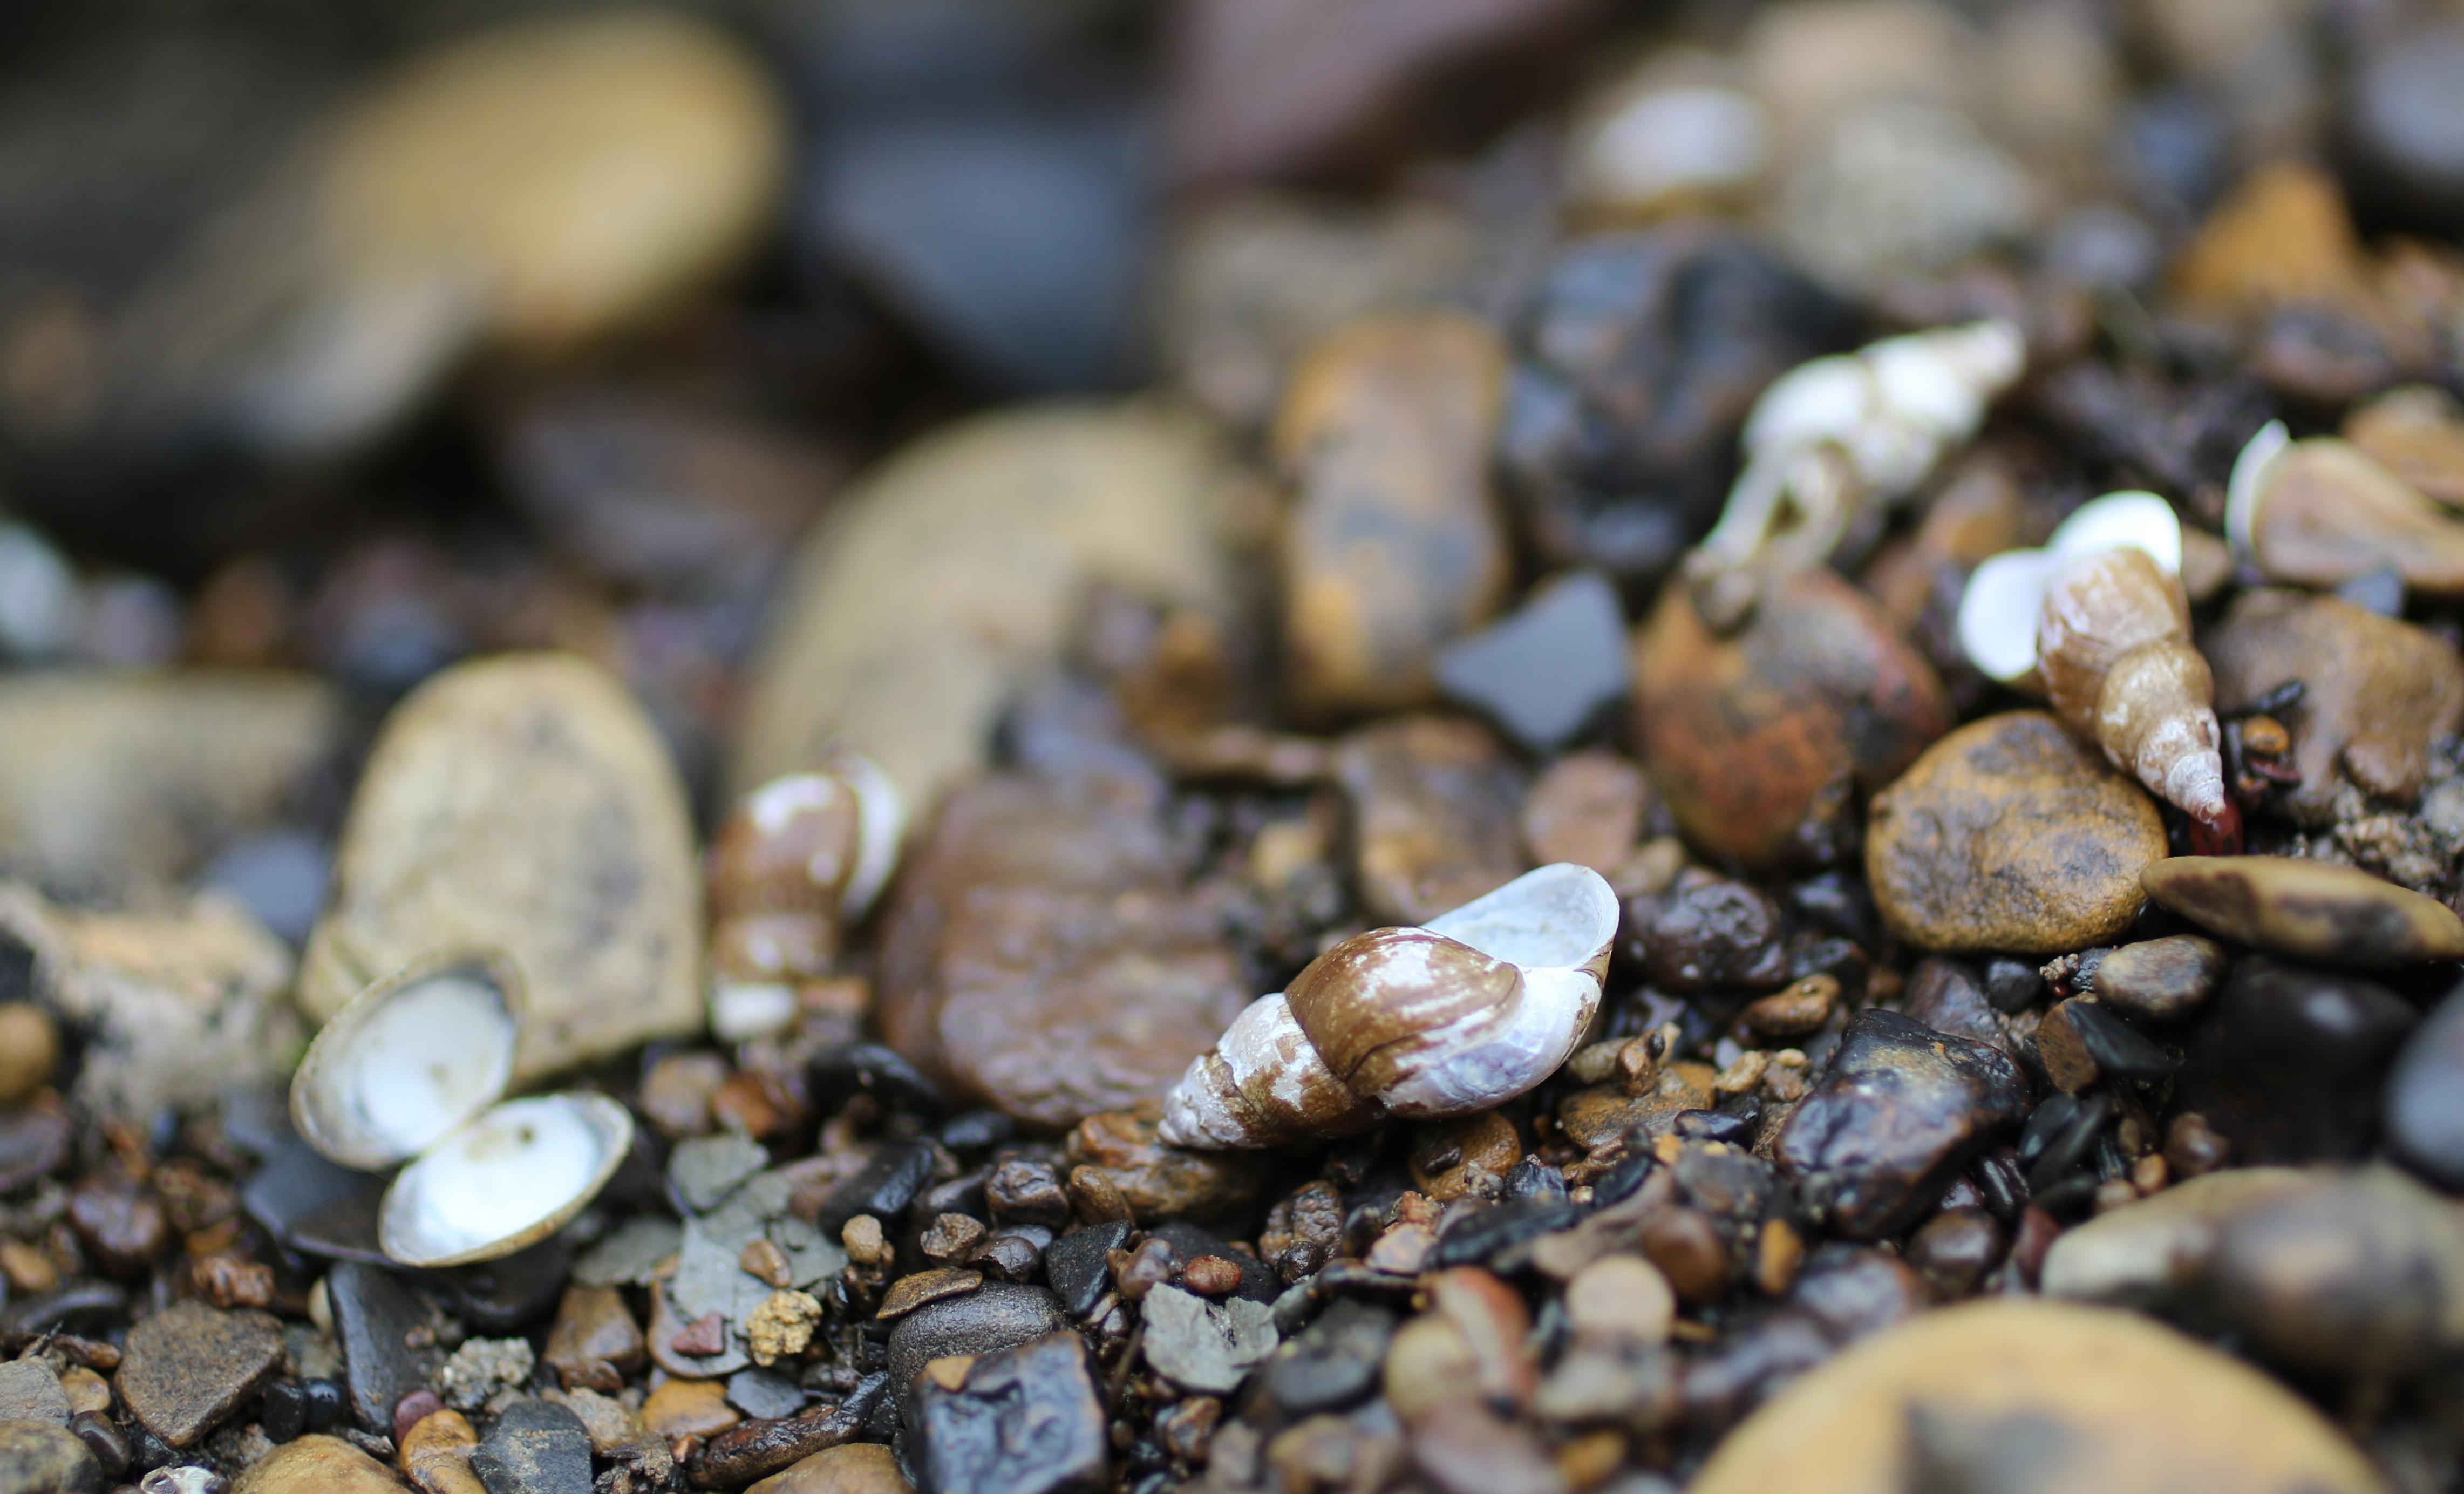 A close-up of shells and pebbles.